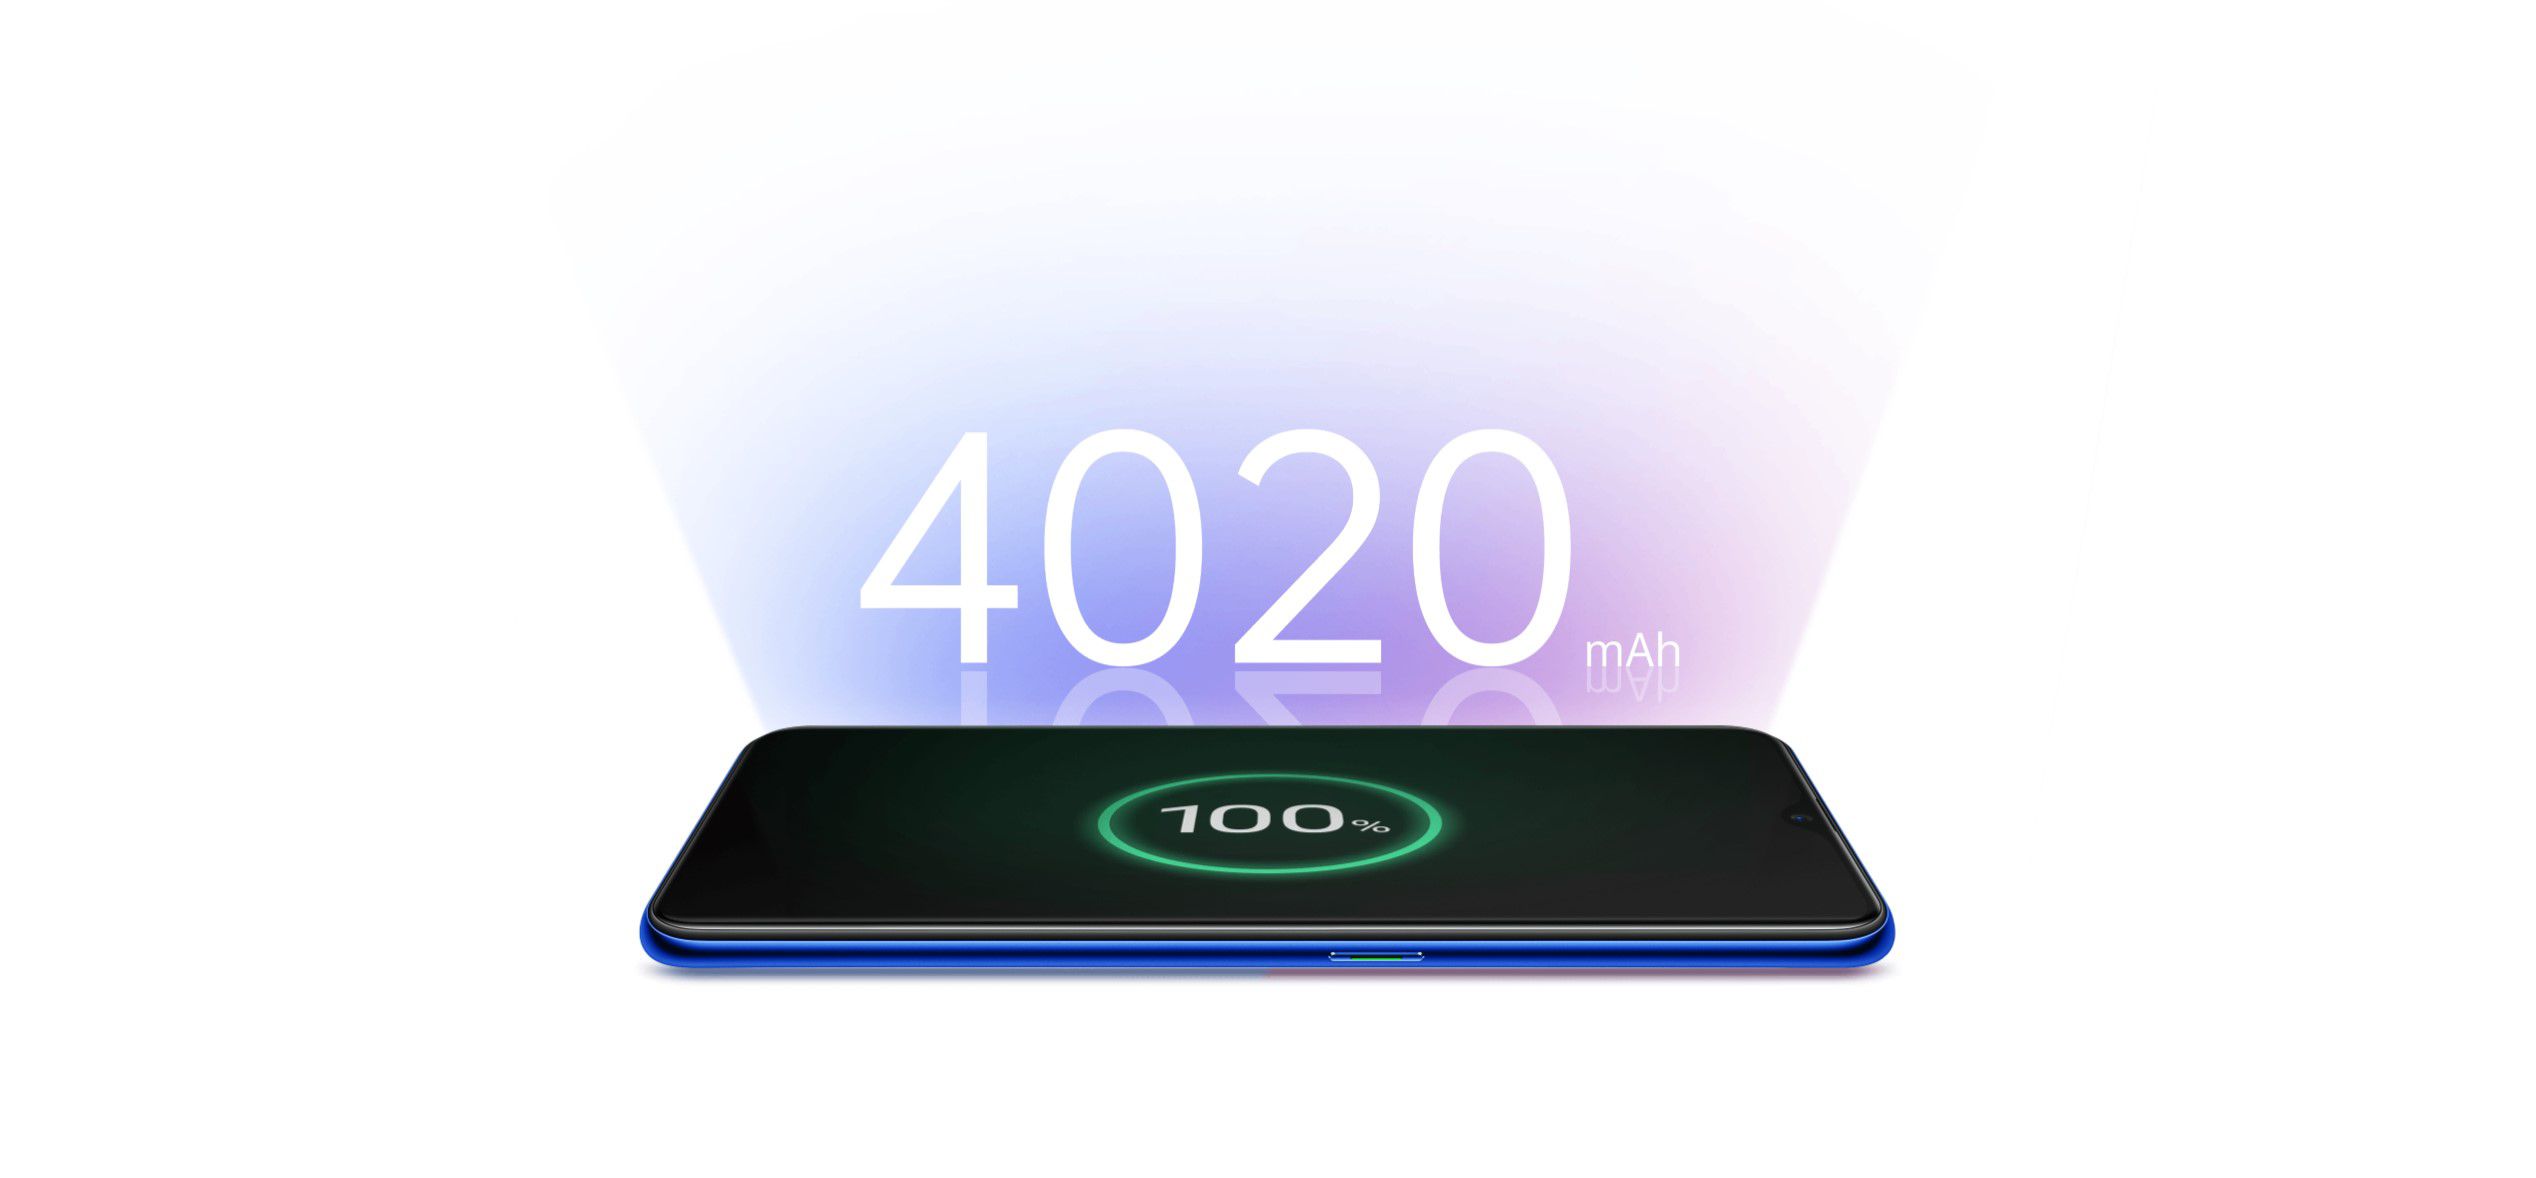 Baterai OPPO A9 4020mAh "width =" 2536 "height =" 1178 "srcset =" https://assets.mspimages.in/gear/wp-content/uploads/2019/07/OPPO-A9-4020mAh-Battery.jpg 2536w , https://assets.mspimages.in/gear/wp-content/uploads/2019/07/OPPO-A9-4020mAh-Battery-300x139.jpg 300w, https://assets.mspimages.in/gear/wp- content / uploads / 2019/07 / OPPO-A9-4020mAh-Battery-768x357.jpg 768w, https://assets.mspimages.in/gear/wp-content/uploads/2019/07/OPPO-A9-4020mAh-Battery -1024x476.jpg 1024w, https://assets.mspimages.in/gear/wp-content/uploads/2019/07/OPPO-A9-4020mAh-Battery-696x323.jpg 696w, https://assets.mspimages.in /gear/wp-content/uploads/2019/07/OPPO-A9-4020mAh-Battery-1068x496.jpg 1068w, https://assets.mspimages.in/gear/wp-content/uploads/2019/07/OPPO- A9-4020mAh-Battery-904x420.jpg 904w, https://assets.mspimages.in/gear/wp-content/uploads/2019/07/OPPO-A9-4020mAh-Battery-50x23.jpg 50w "ukuran =" ( lebar maks: 2536px) 100vw, 2536px